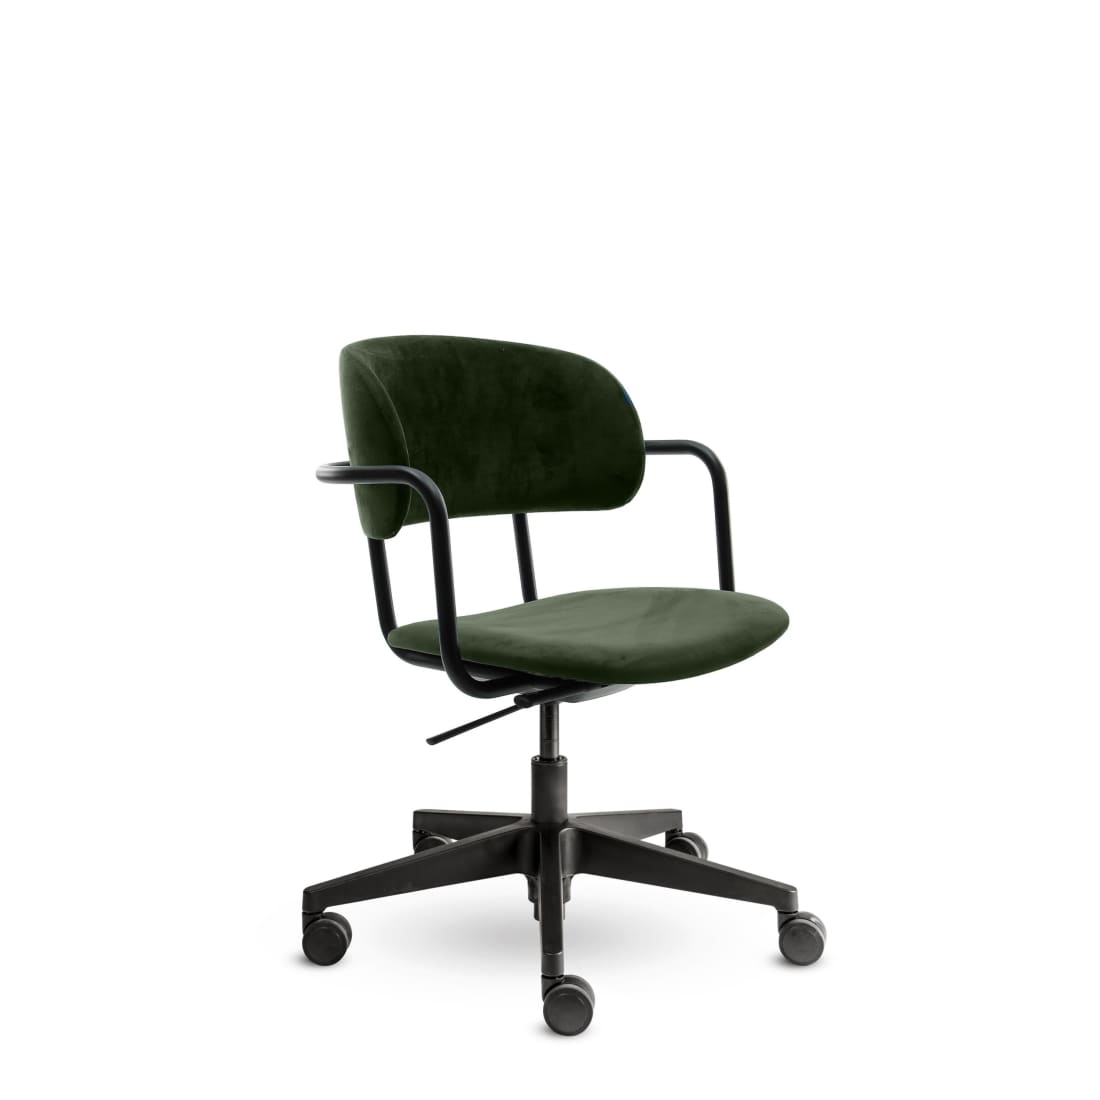 Design Office Chair Green Pure